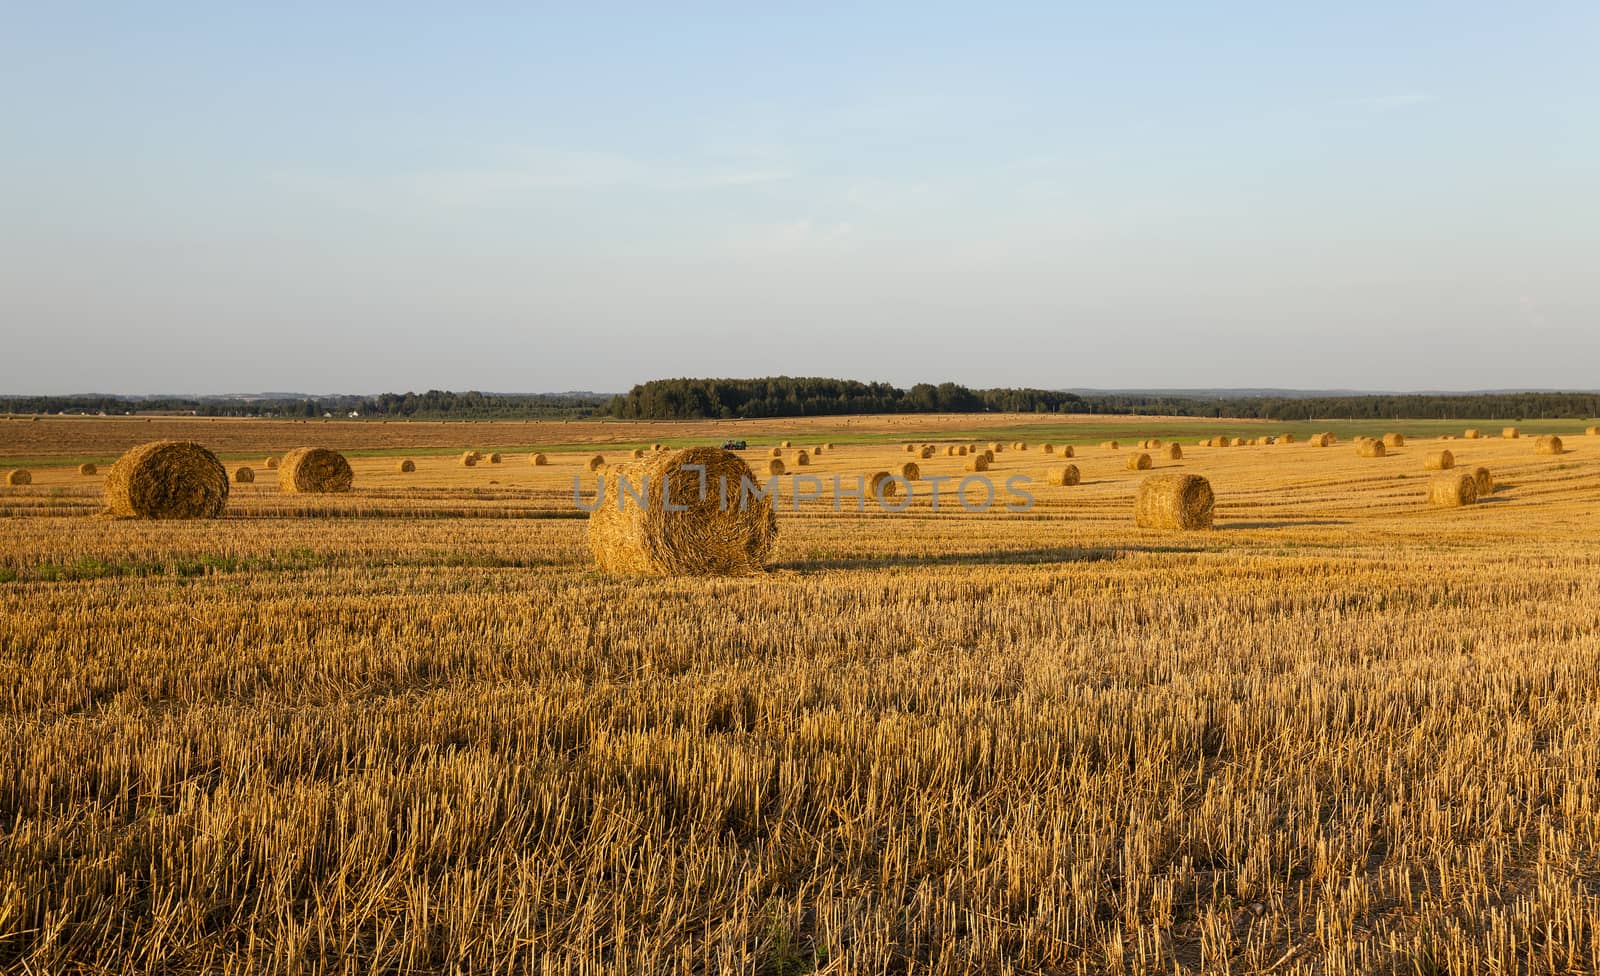  the photographed straw stack during the harvest company of cereals